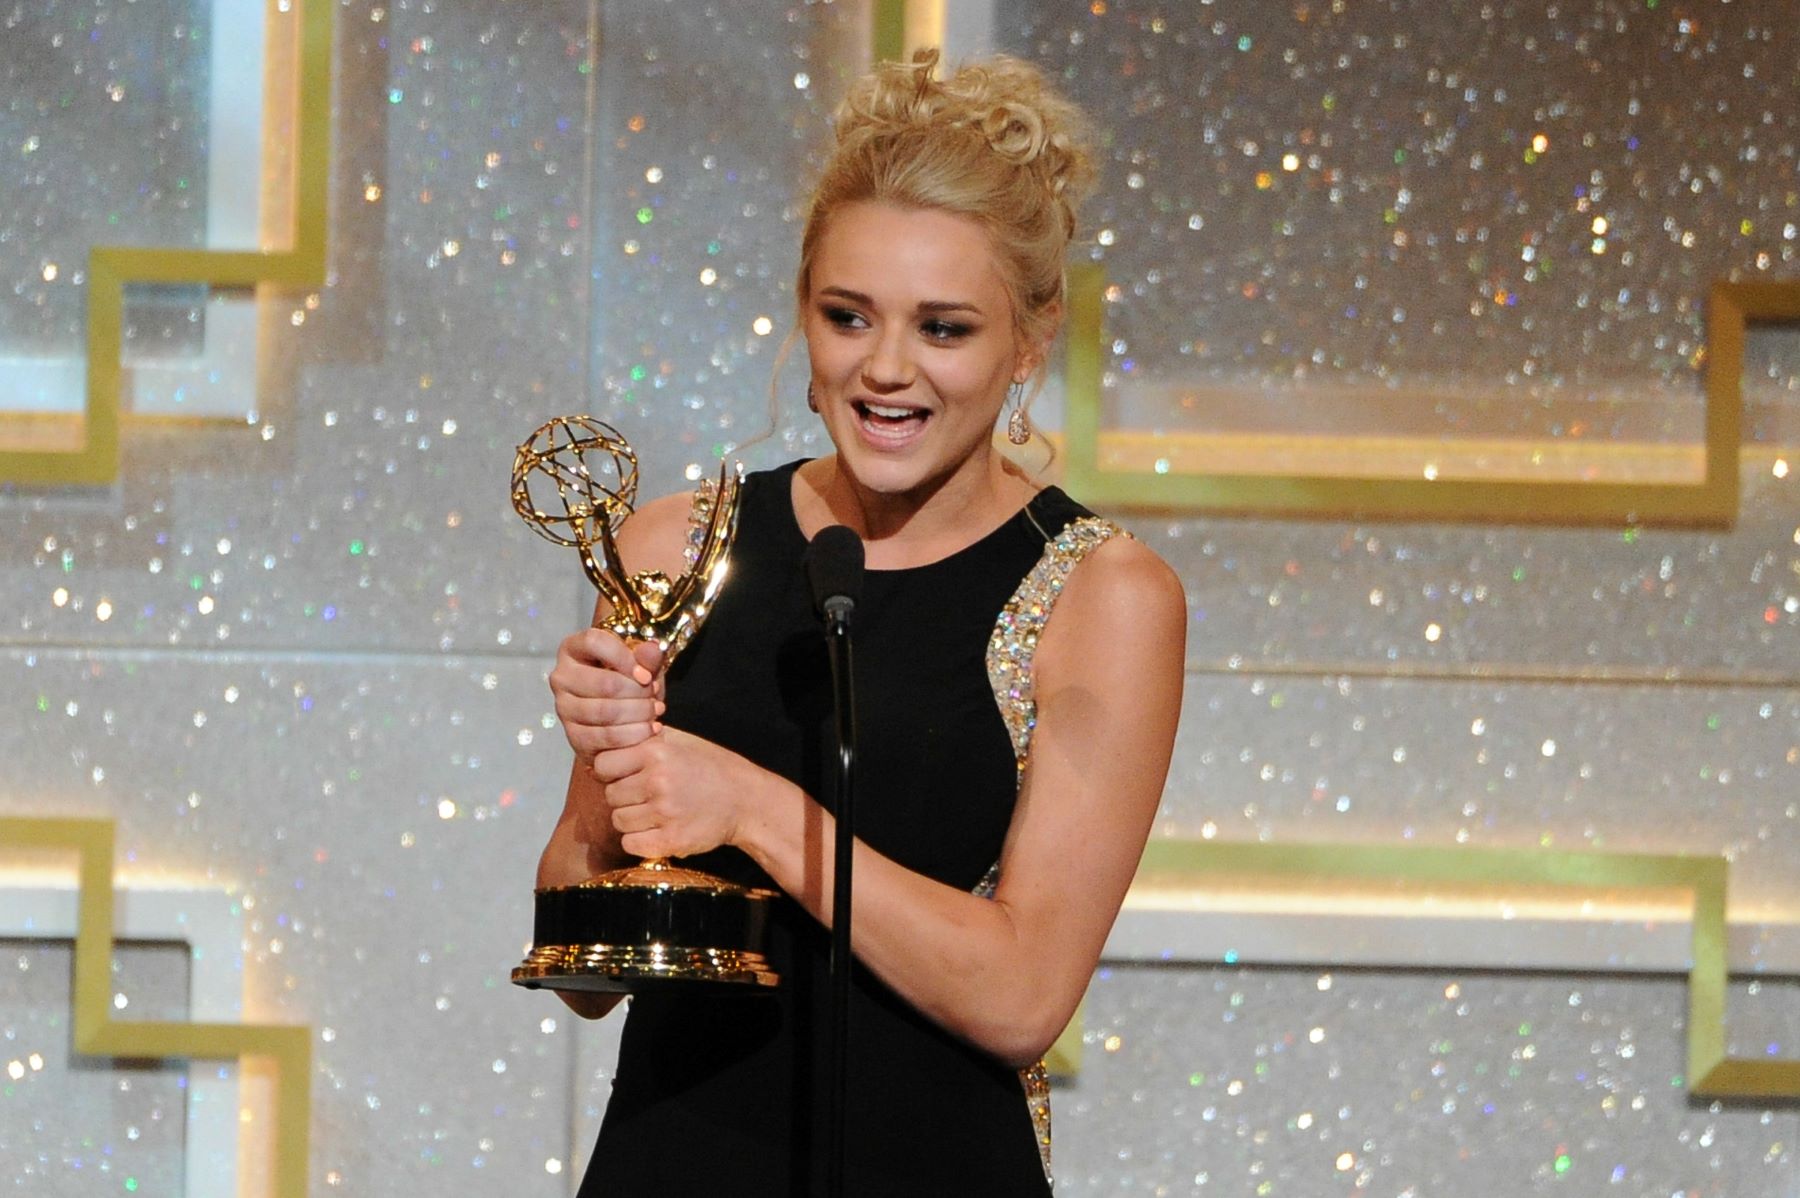 'The Young and the Restless' actor Hunter King accepting an award at the 41st Annual Daytime Emmy Awards